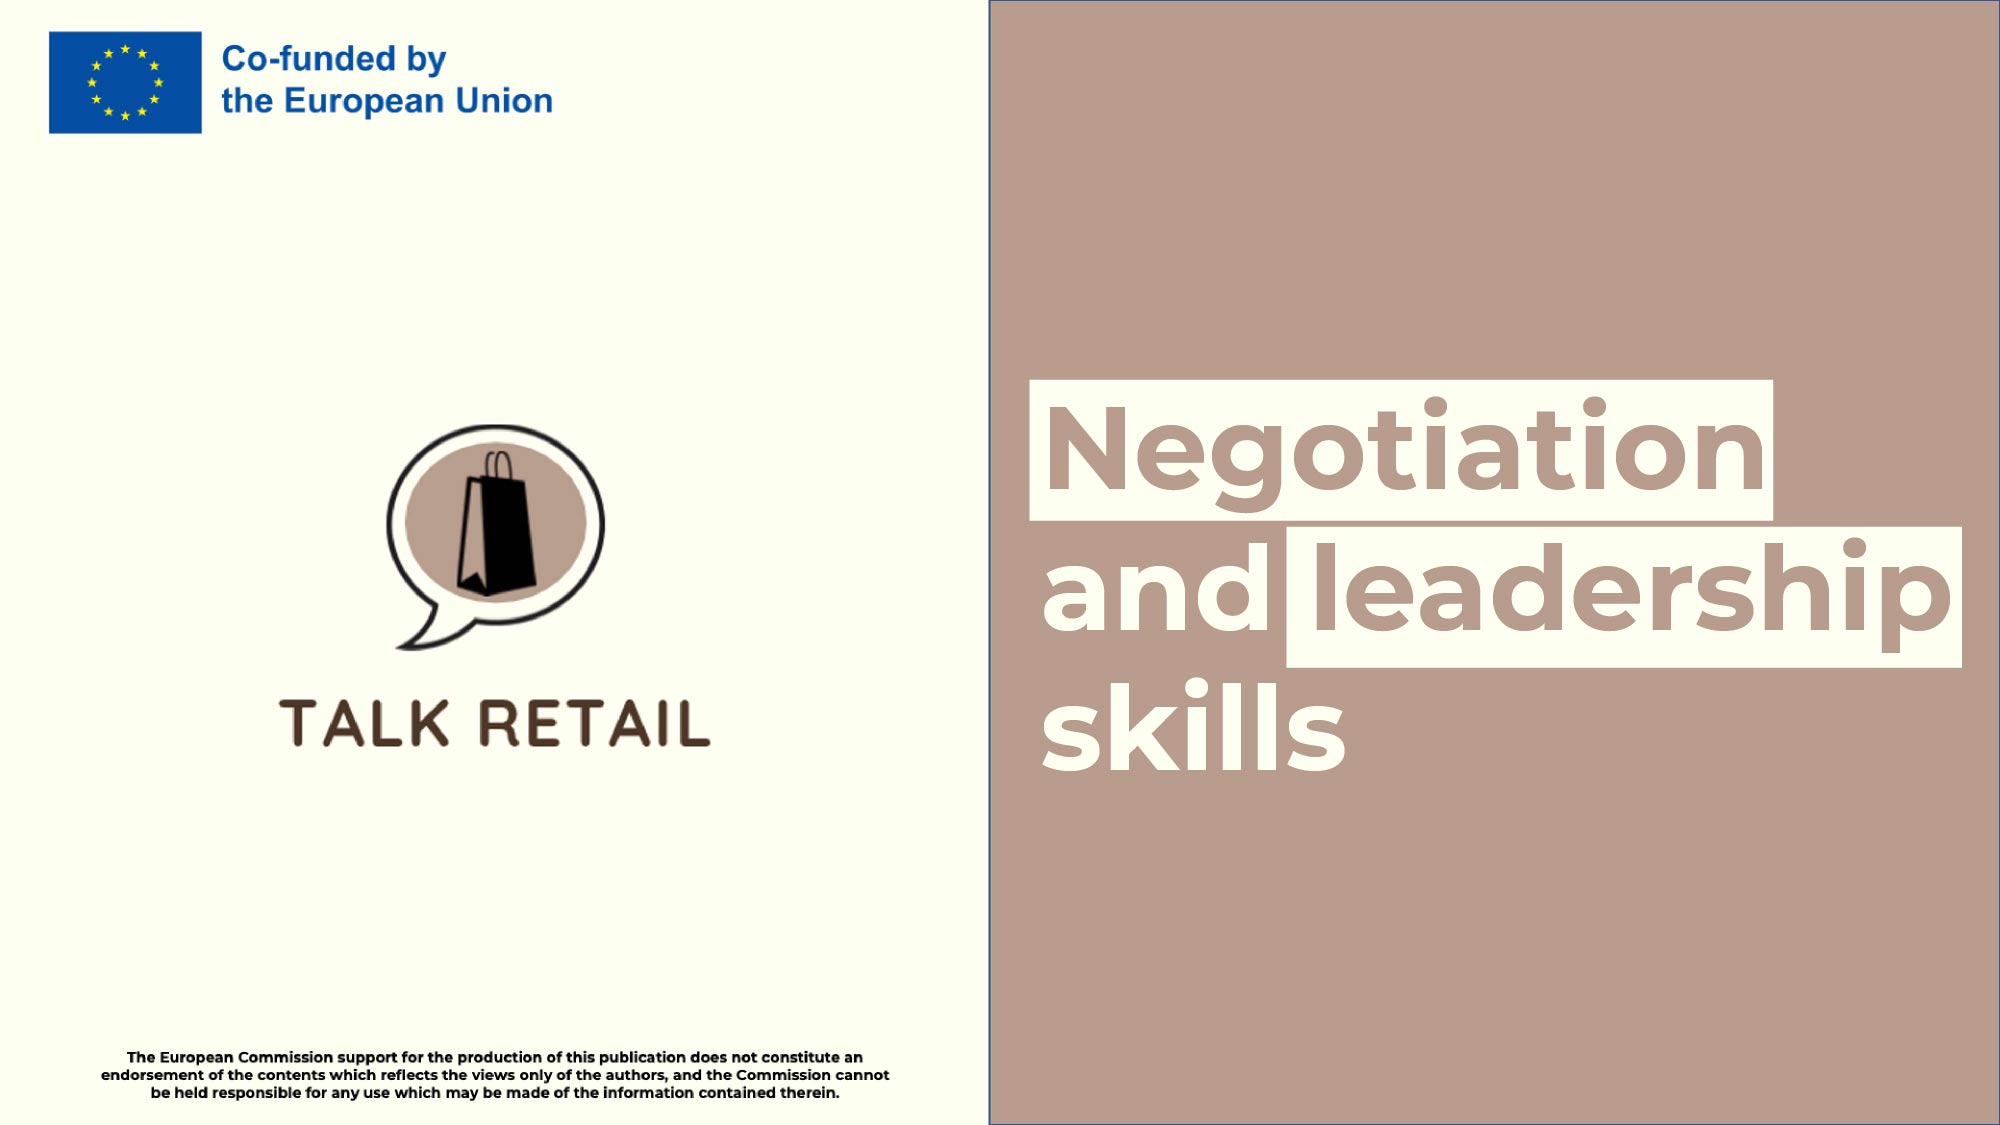 Course 8 - Negotiation and leadership skills